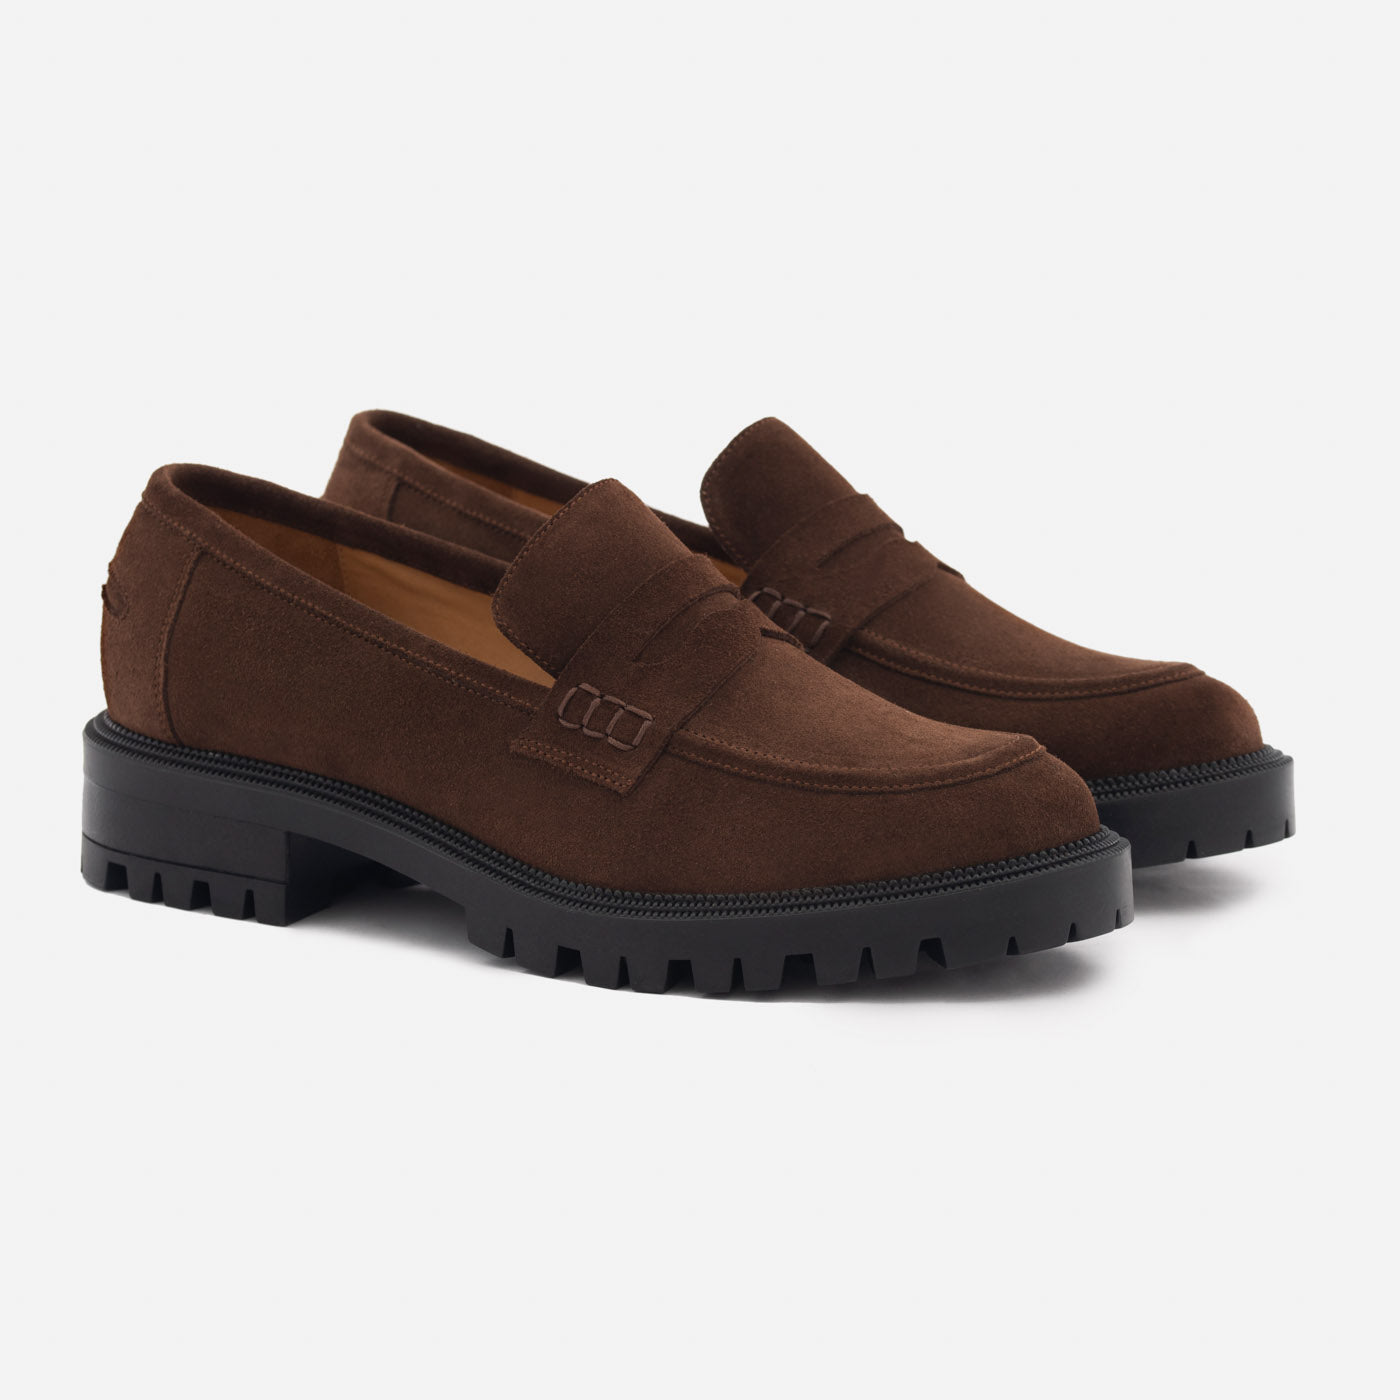 Georgia Loafers - Suede - Women's